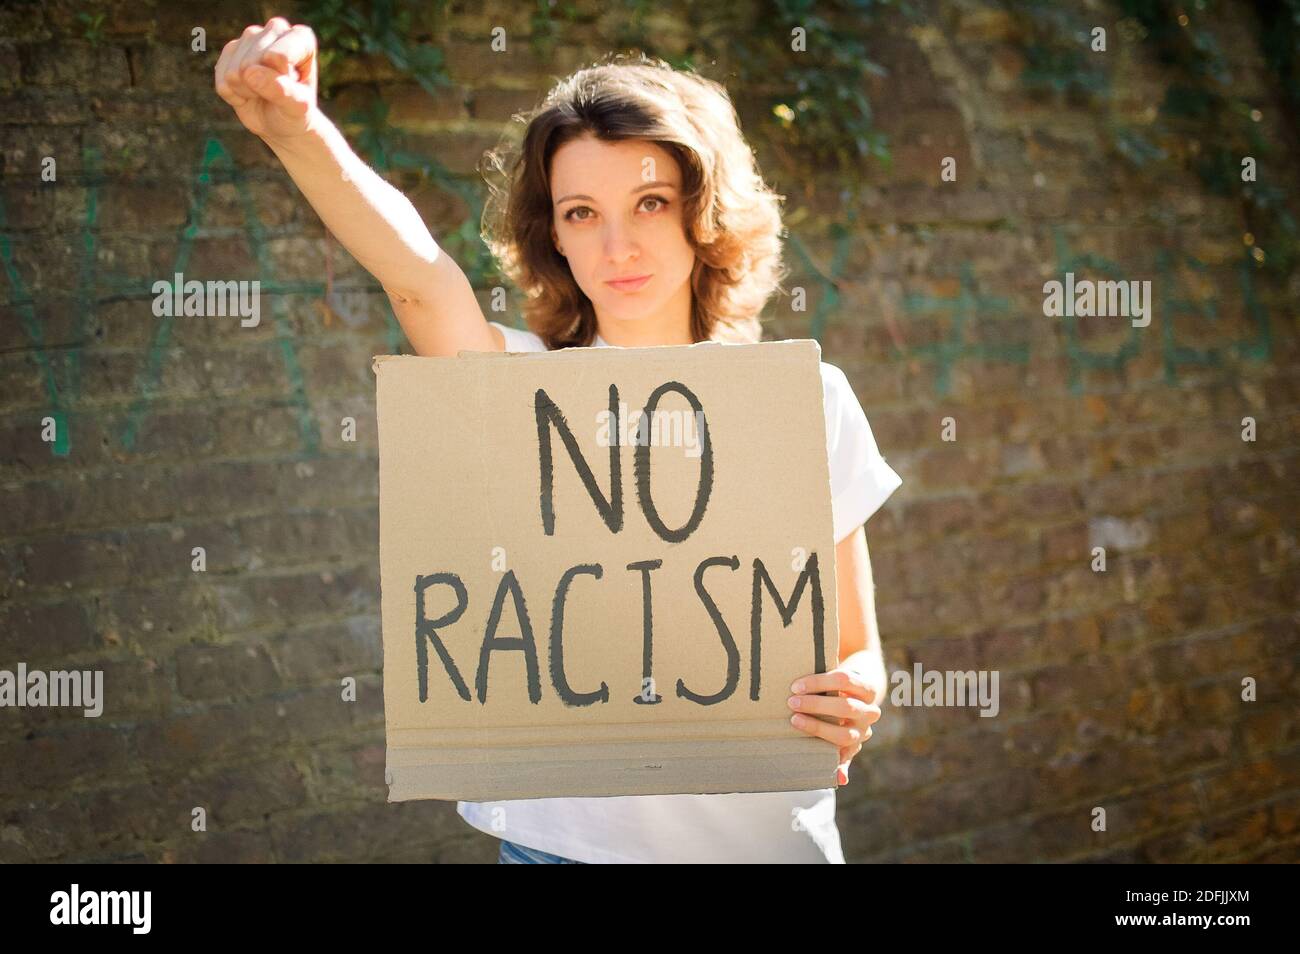 Upset young protesting woman in white shirt holds protest sign broadsheet placard with slogan 'No racism' for public demonstration on stone wall Stock Photo